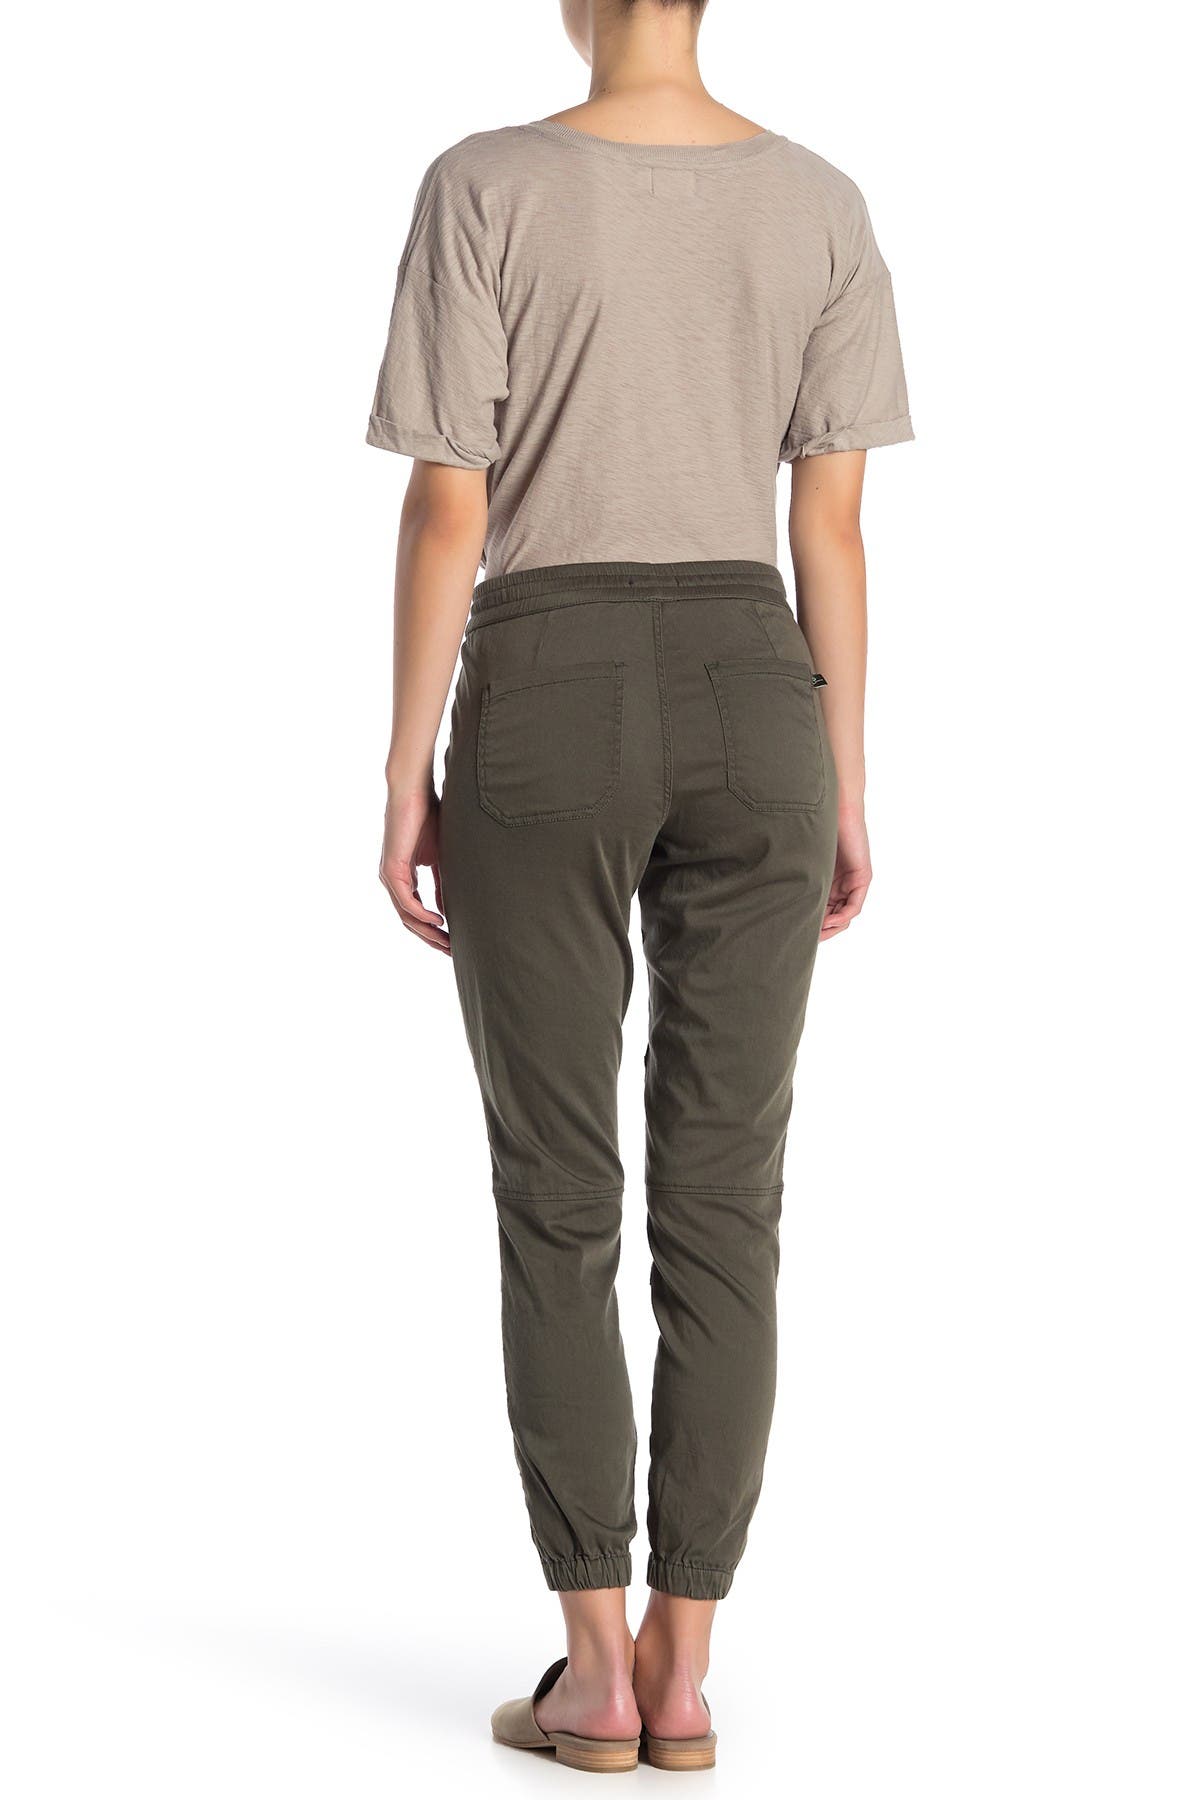 Supplies By Unionbay Demery Solid Sateen Joggers In Light/pastel Green9